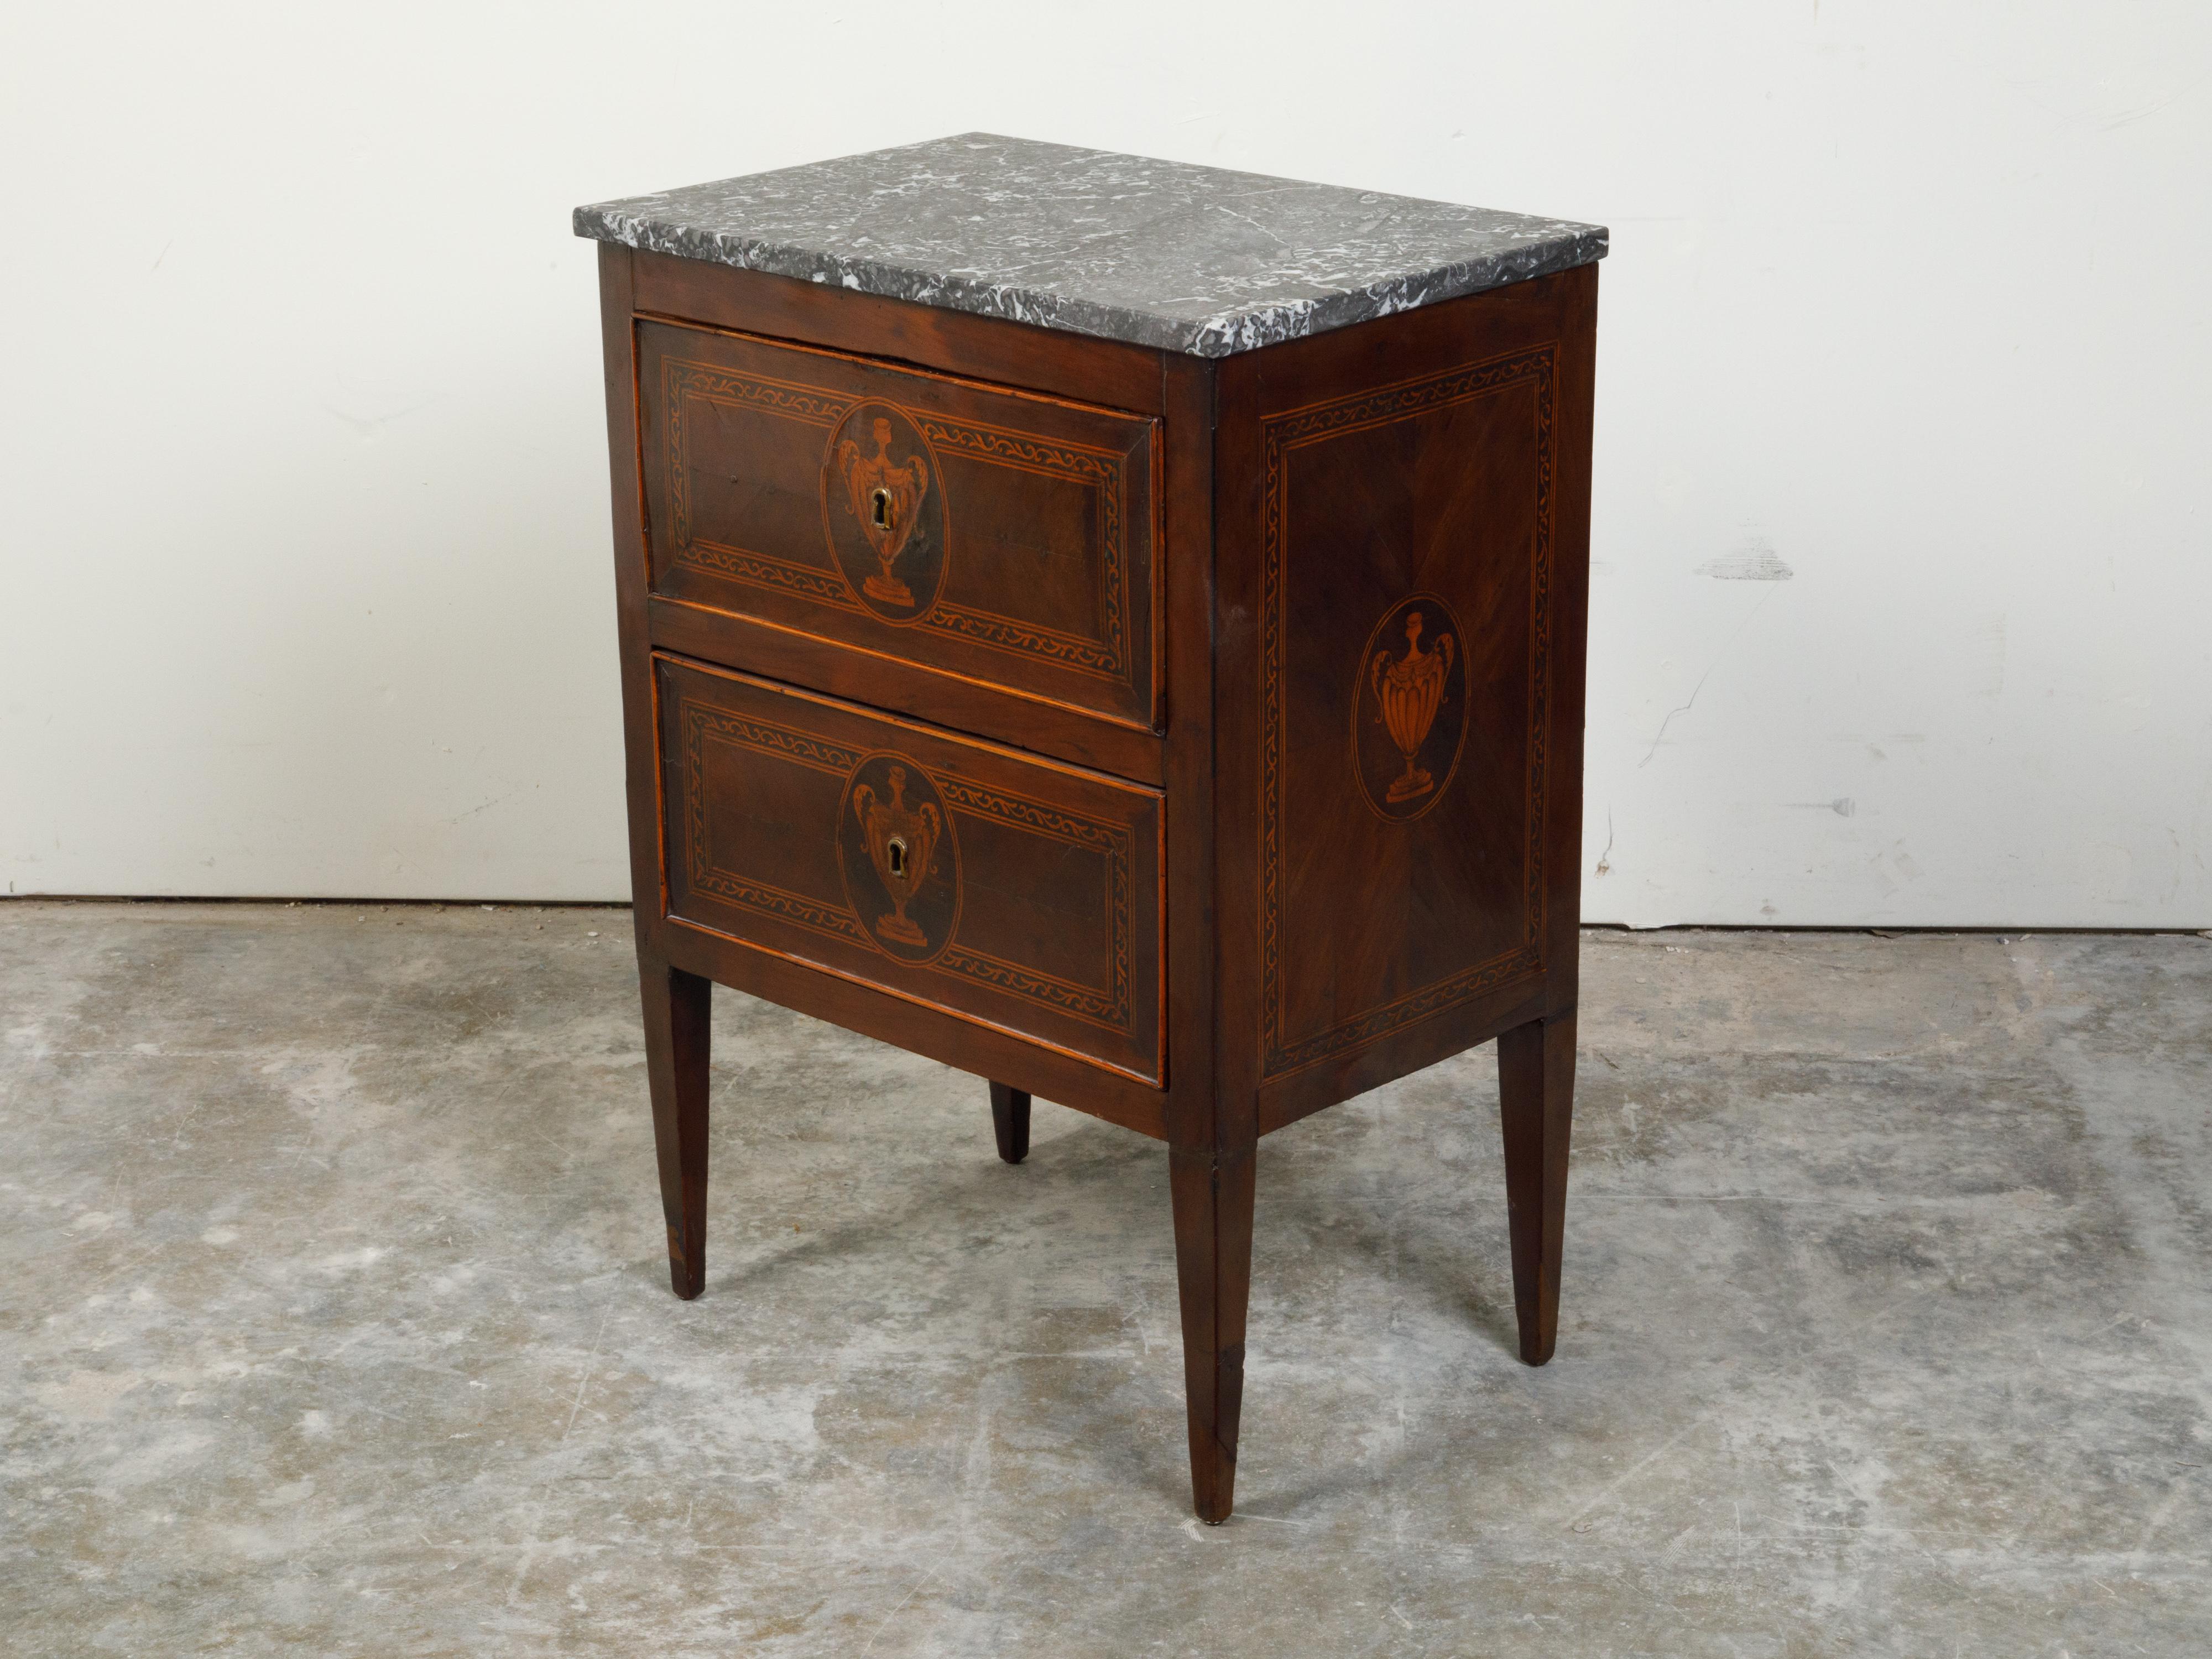 Petite Italian 18th Century Neoclassical Commode with Marble Top and Marquetry In Good Condition For Sale In Atlanta, GA